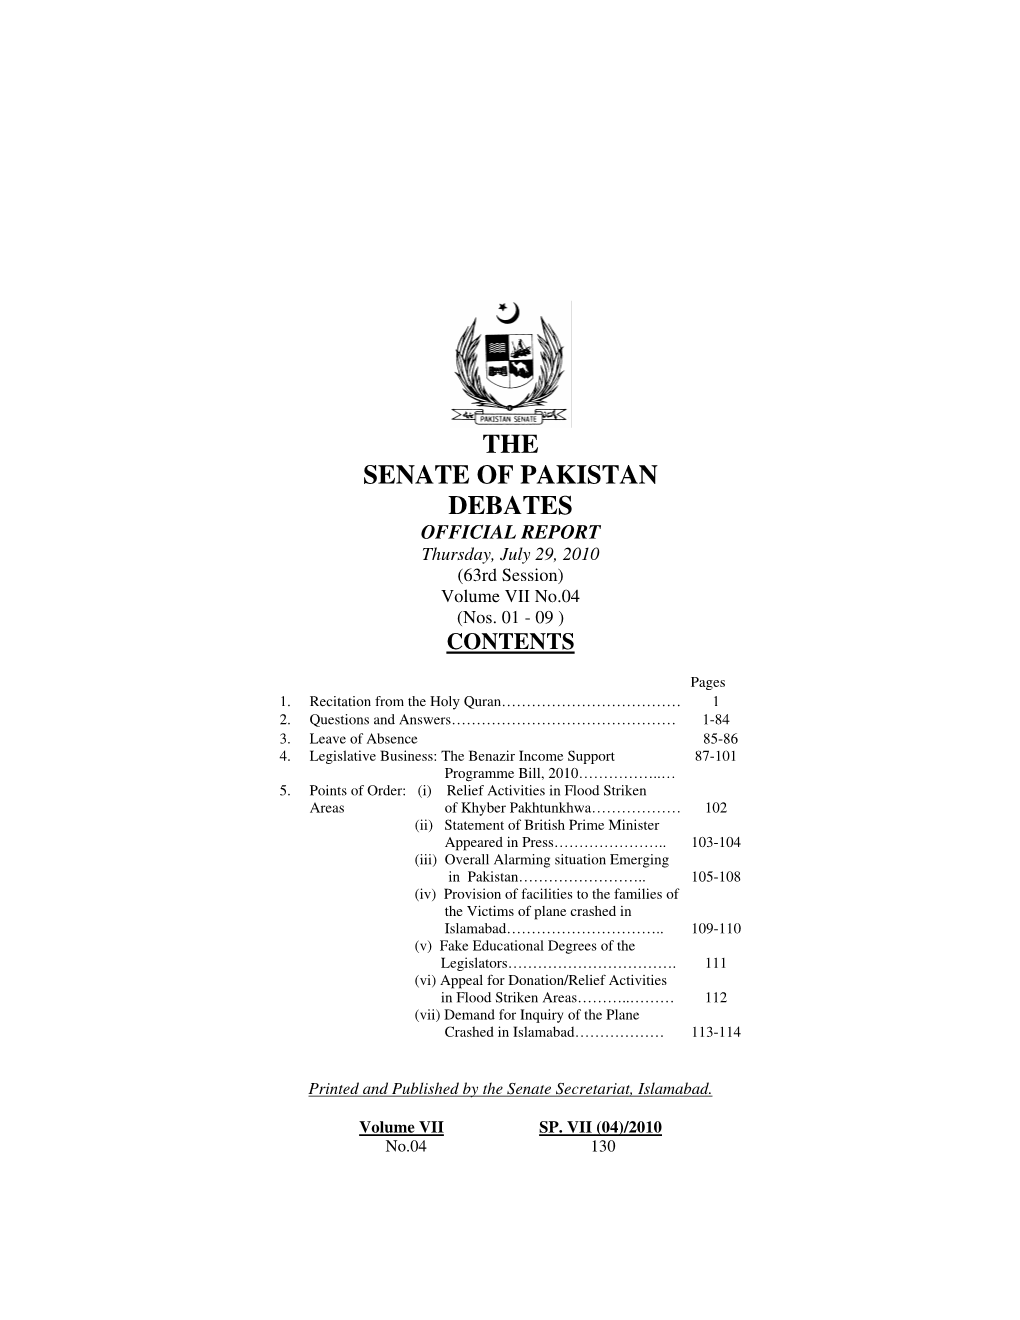 THE SENATE of PAKISTAN DEBATES OFFICIAL REPORT Thursday, July 29, 2010 (63Rd Session) Volume VII No.04 (Nos